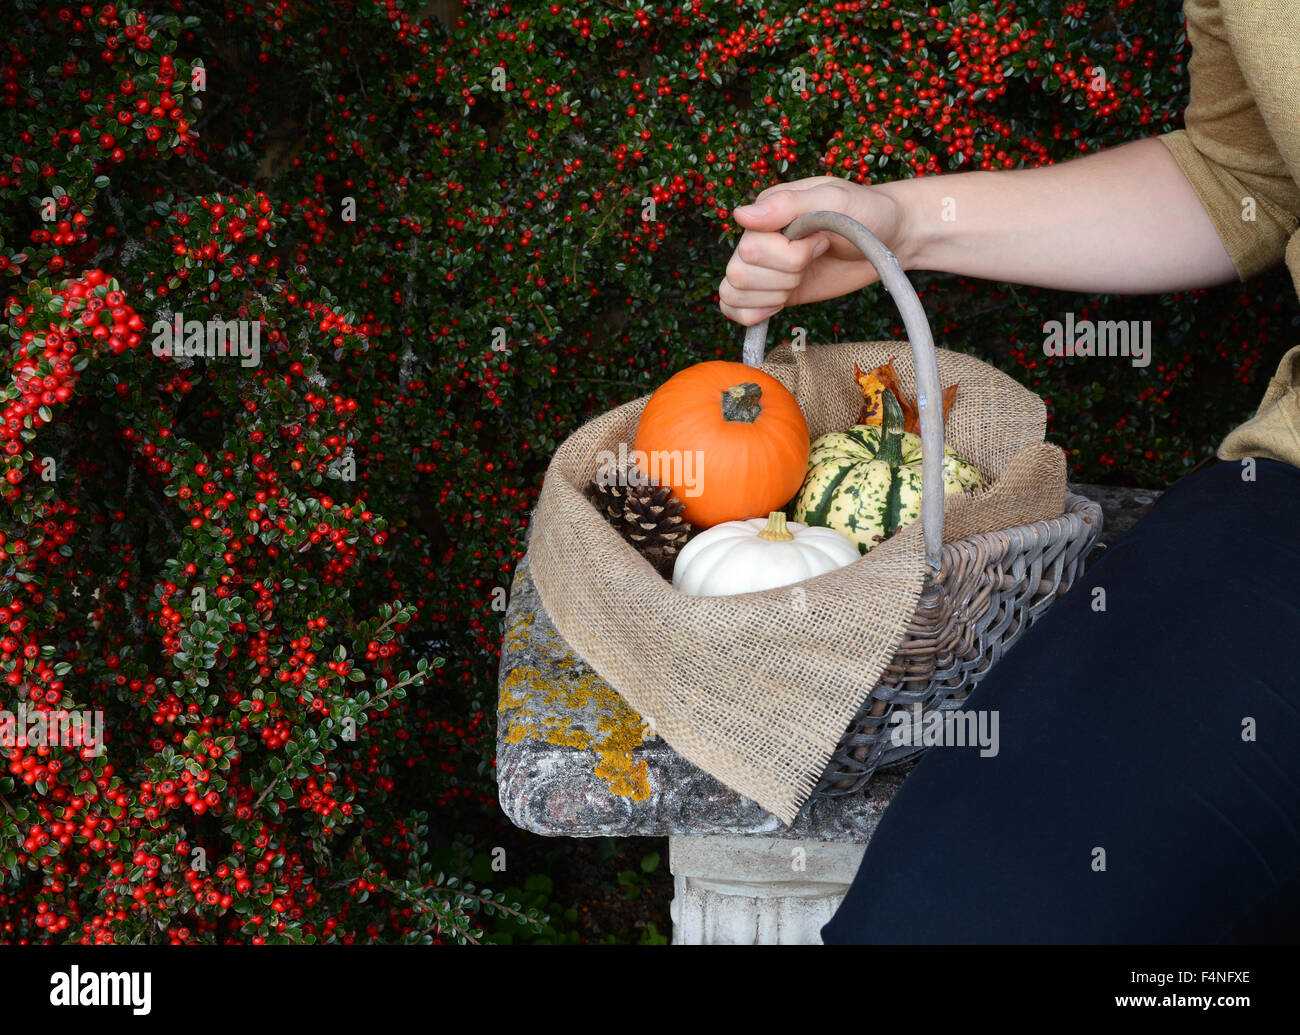 Young woman sitting on bench with a woven basket of autumn gourds, pine cones and leaves against red cotoneaster berries Stock Photo